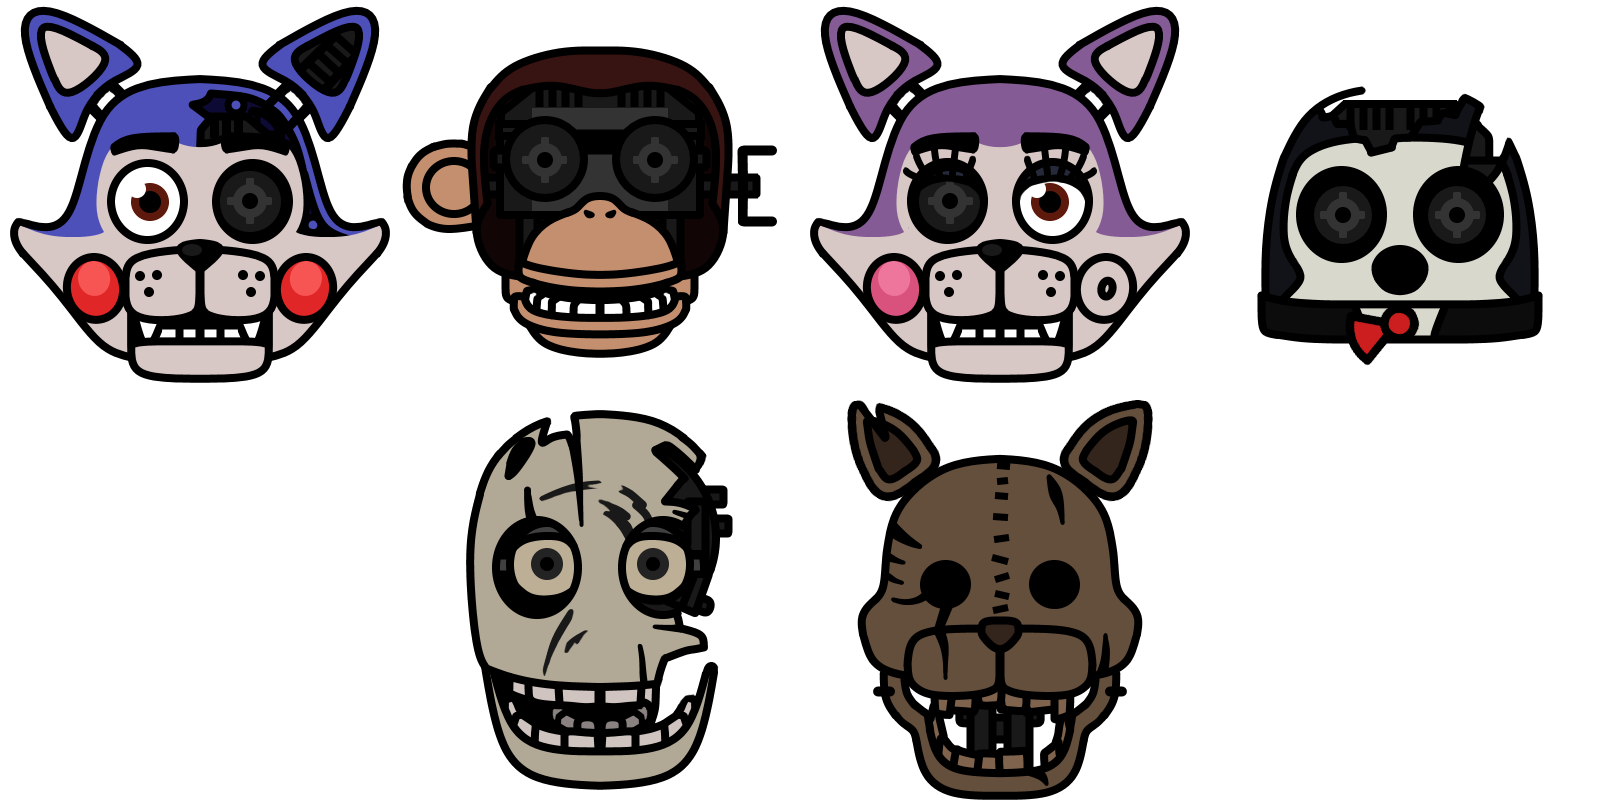 Five Nights at Candys World [Part 2] by TheGoldenGamer90010 on DeviantArt